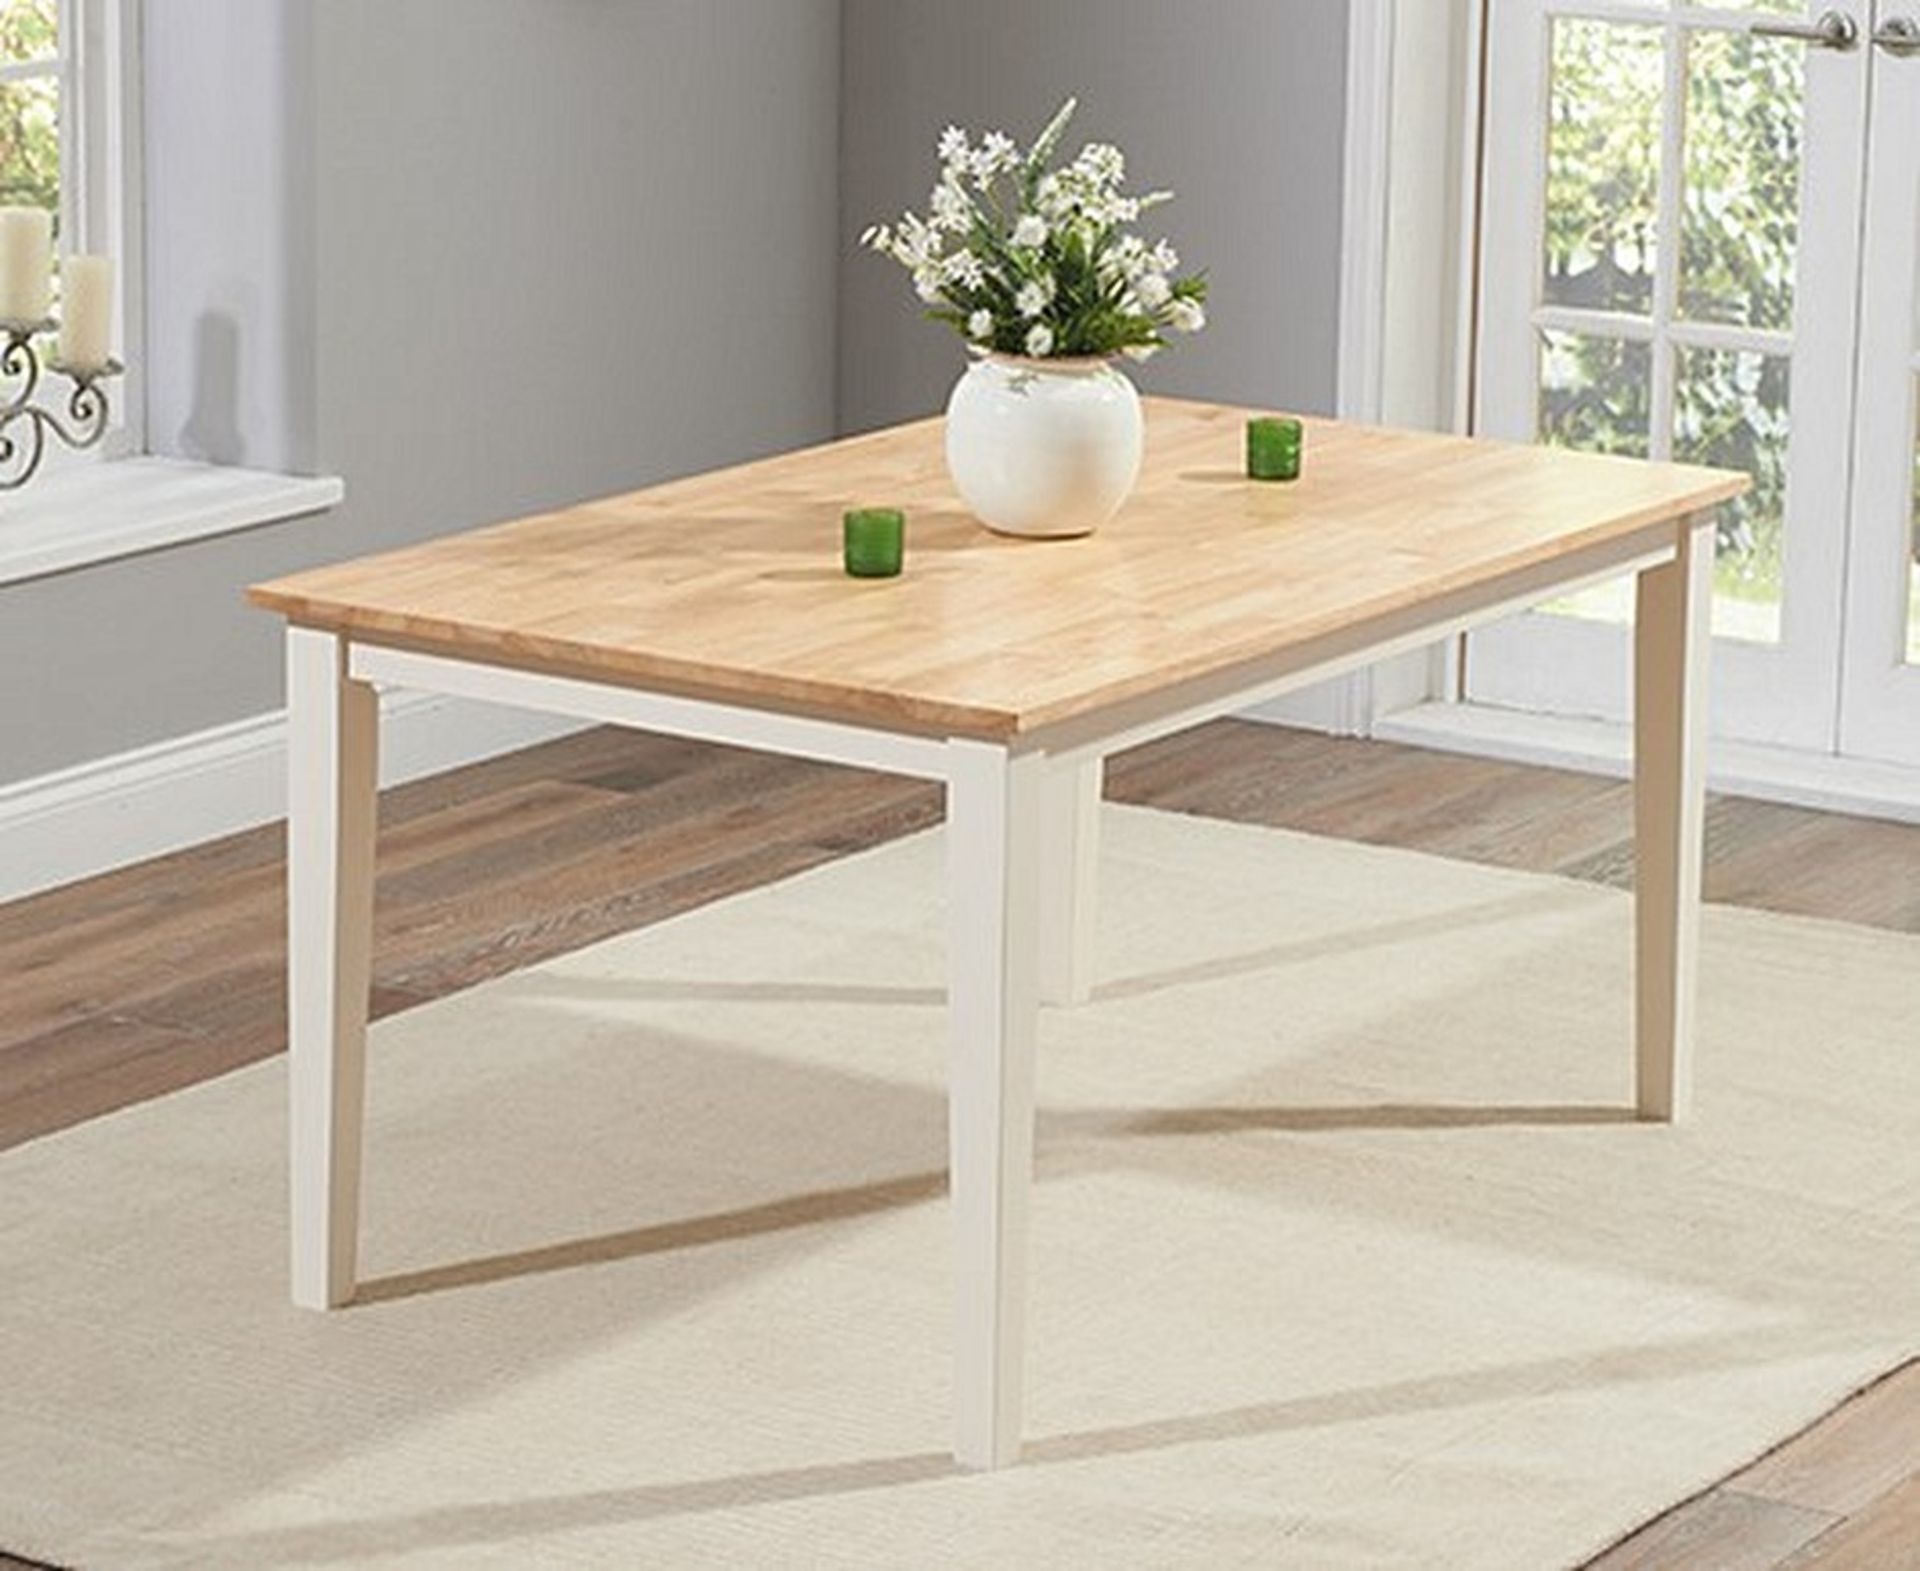 Chiltern 150cm Cream and Oak Dining Table Chiltern Collection The Chiltern collection is all about